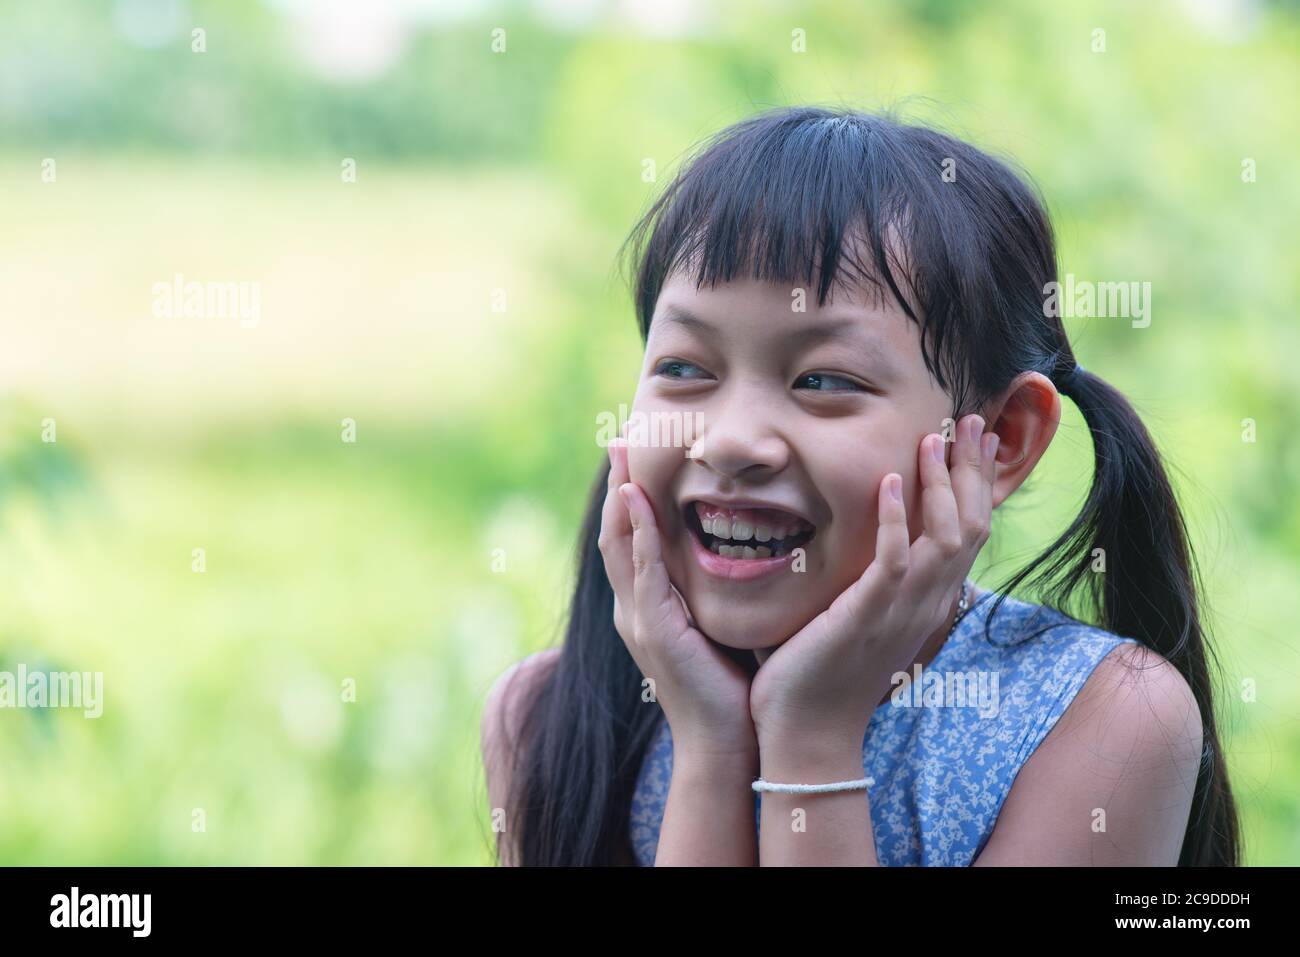 Portrait of a happy smiling asian child girl Stock Photo